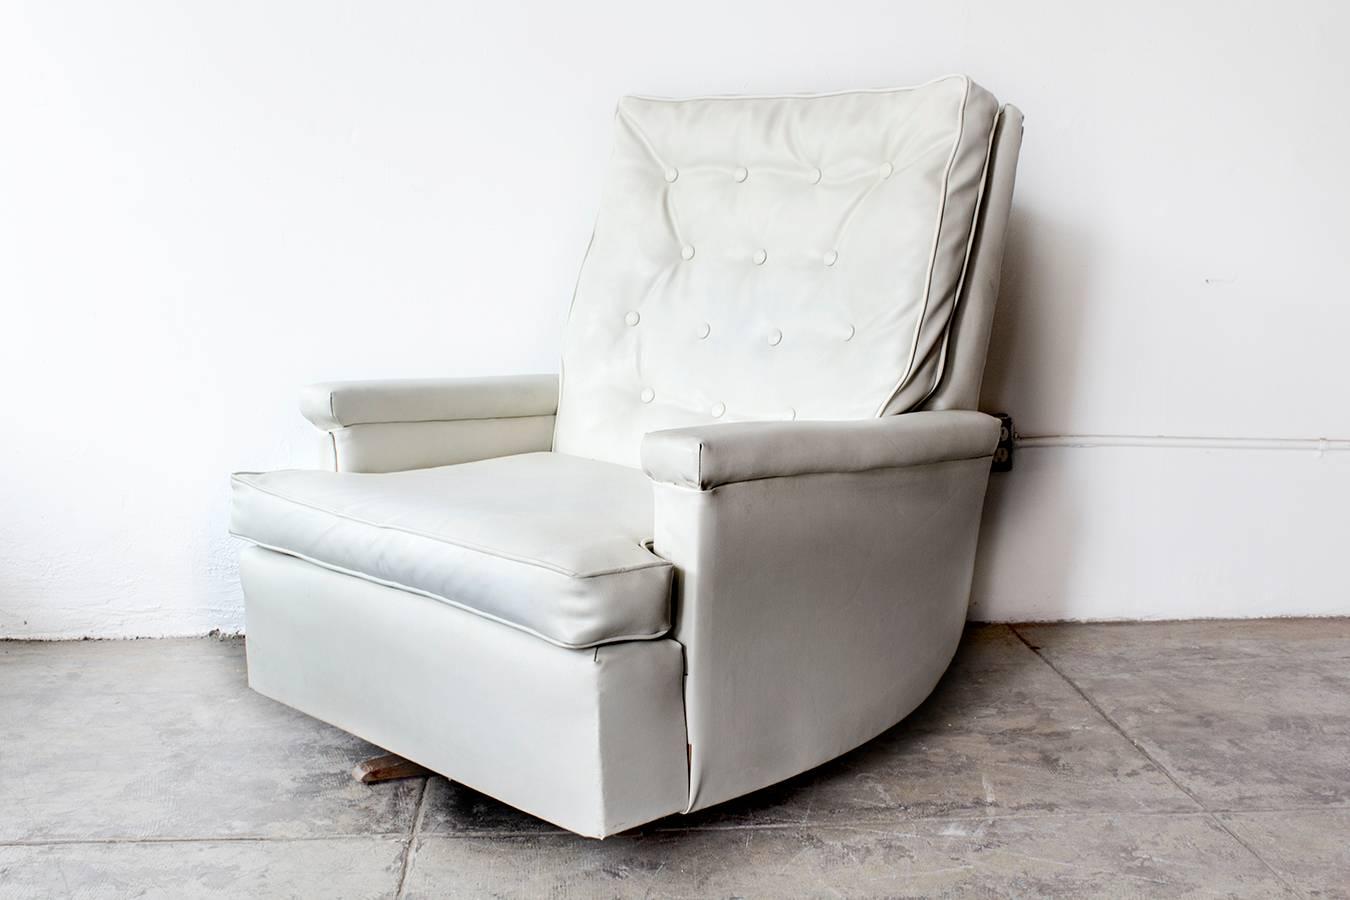 Fantastic 1970s tufted recliner with original white vinyl. Sits on a rocking base. Super comfortable Please inquire about custom reupholstery options at additional cost. 

Dimensions: 34